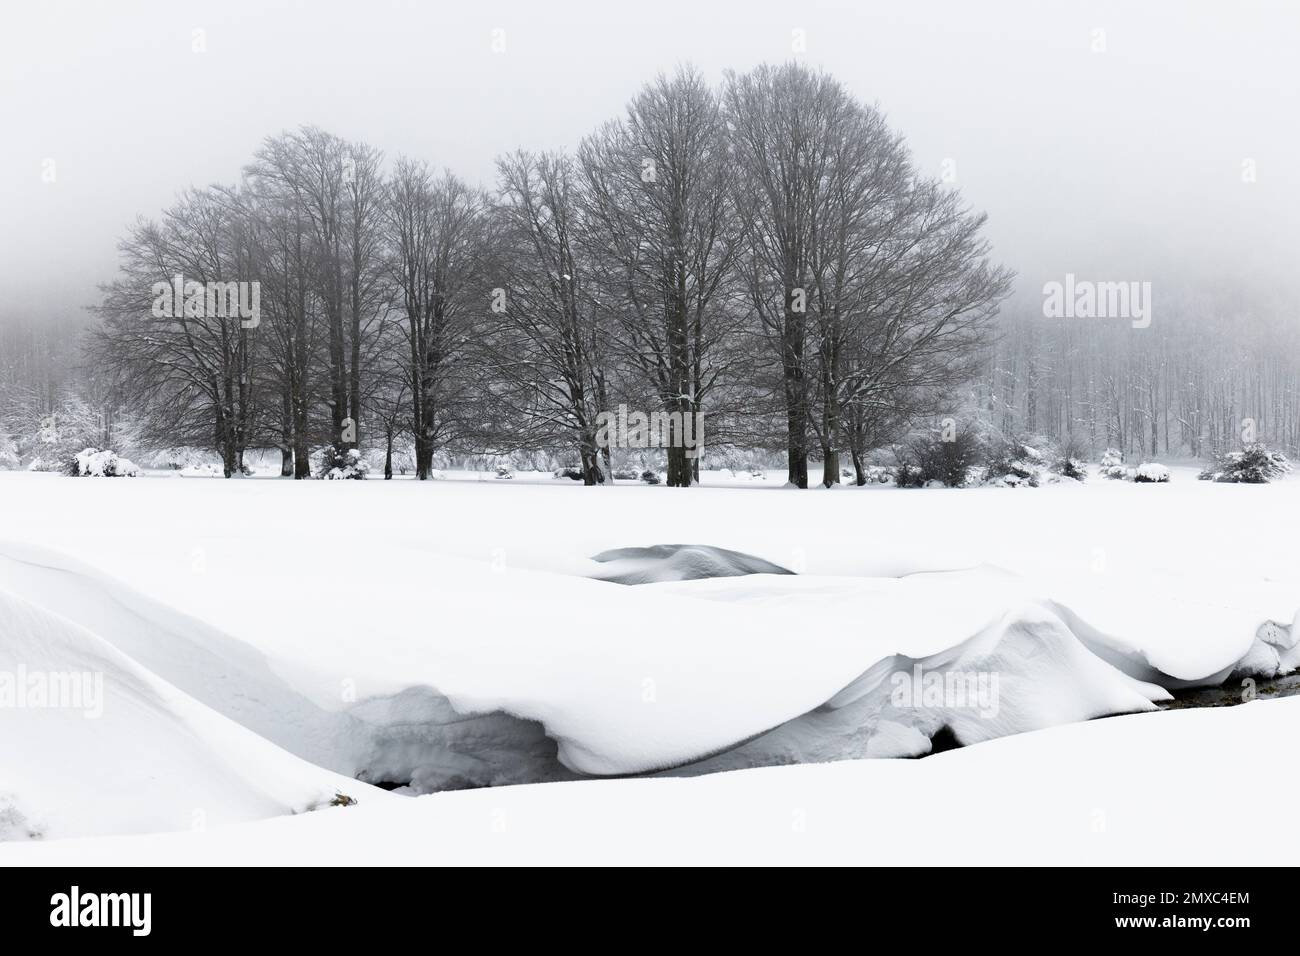 Snowy Landscape, winter landscape with trees and a creek, Campania, Italy Stock Photo